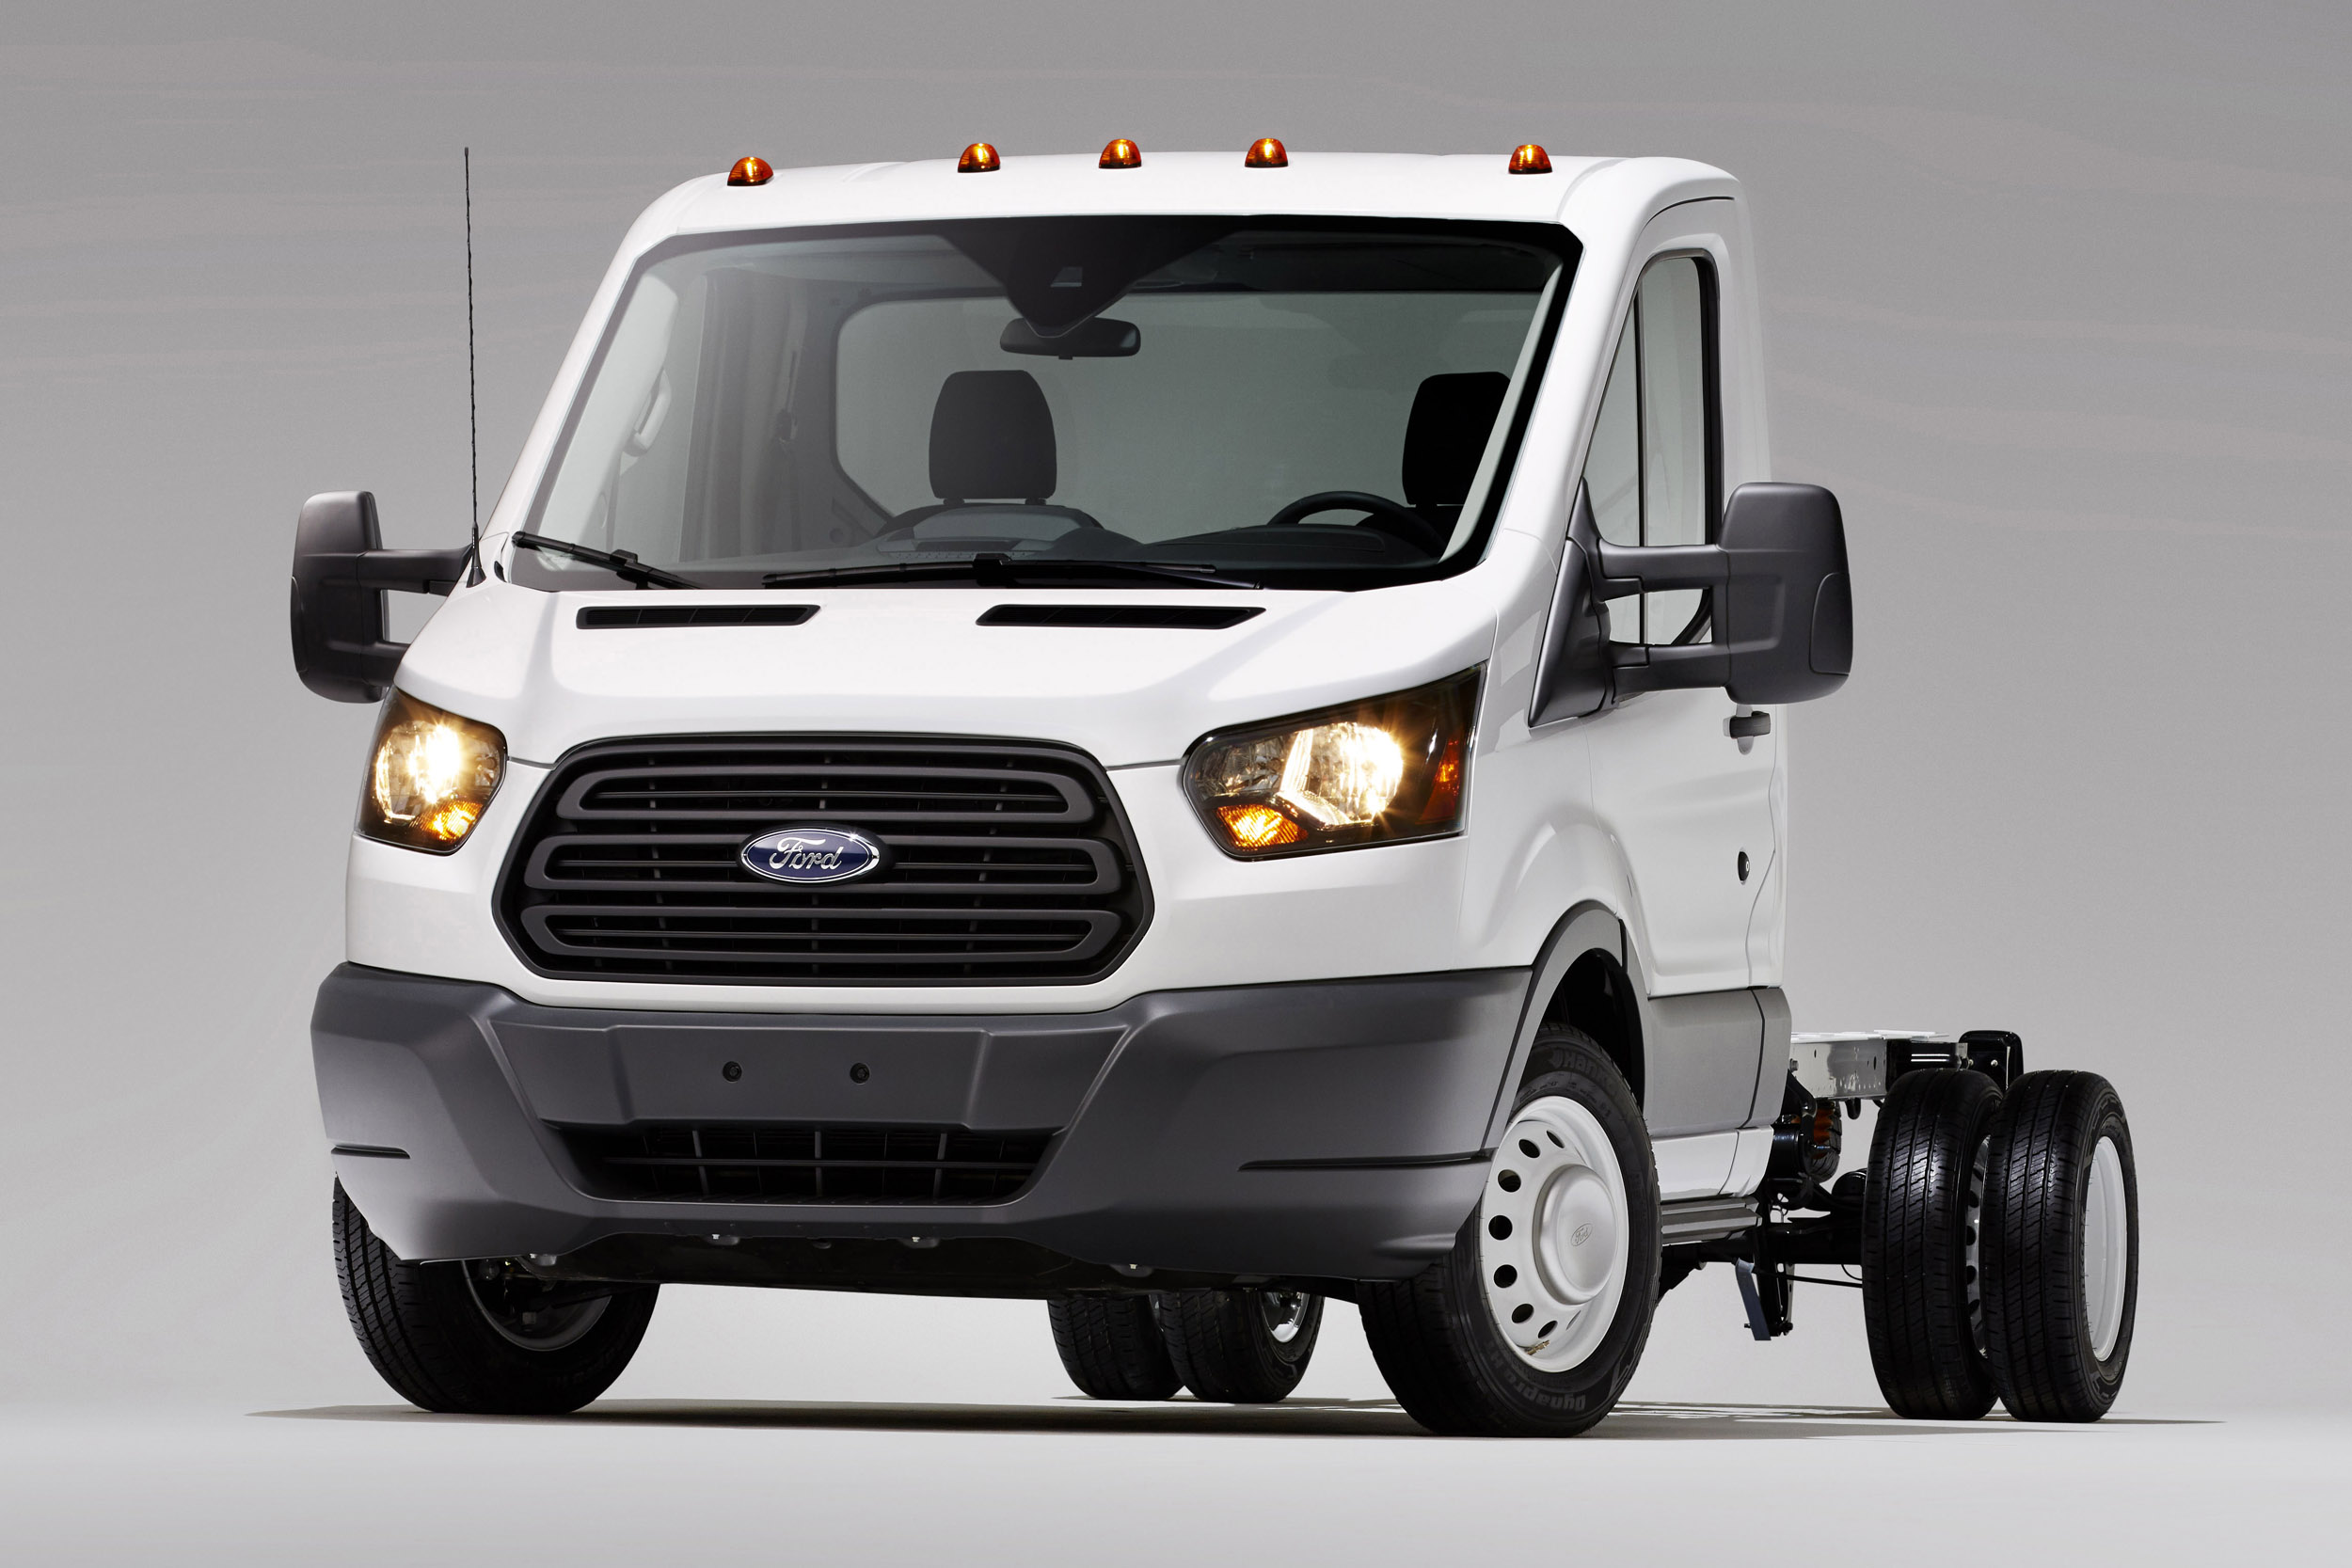 2016 Ford Transit Cutaway Overview MSN Autos